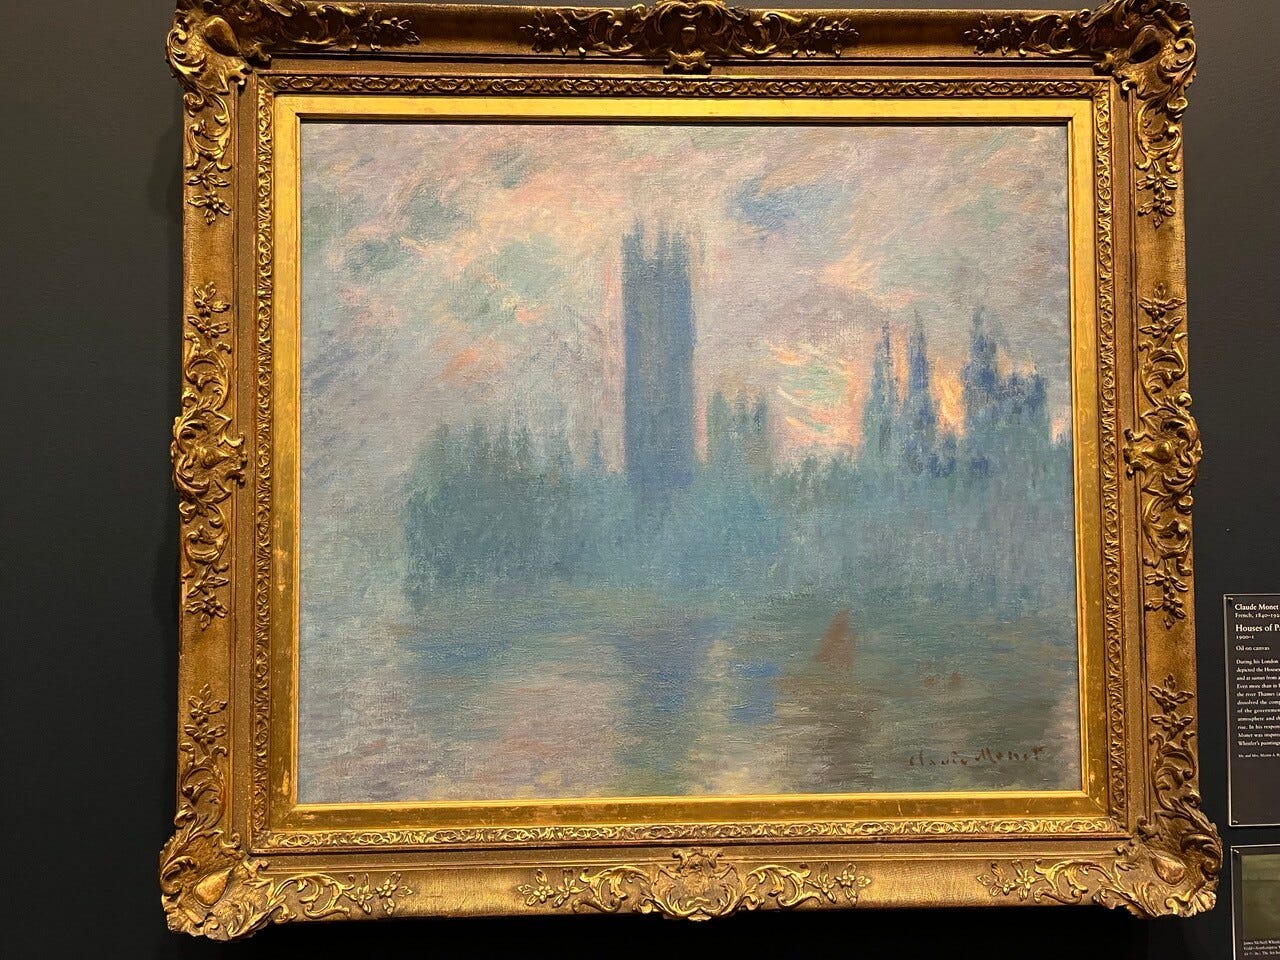 The Houses of Parliament by Claude Monet.